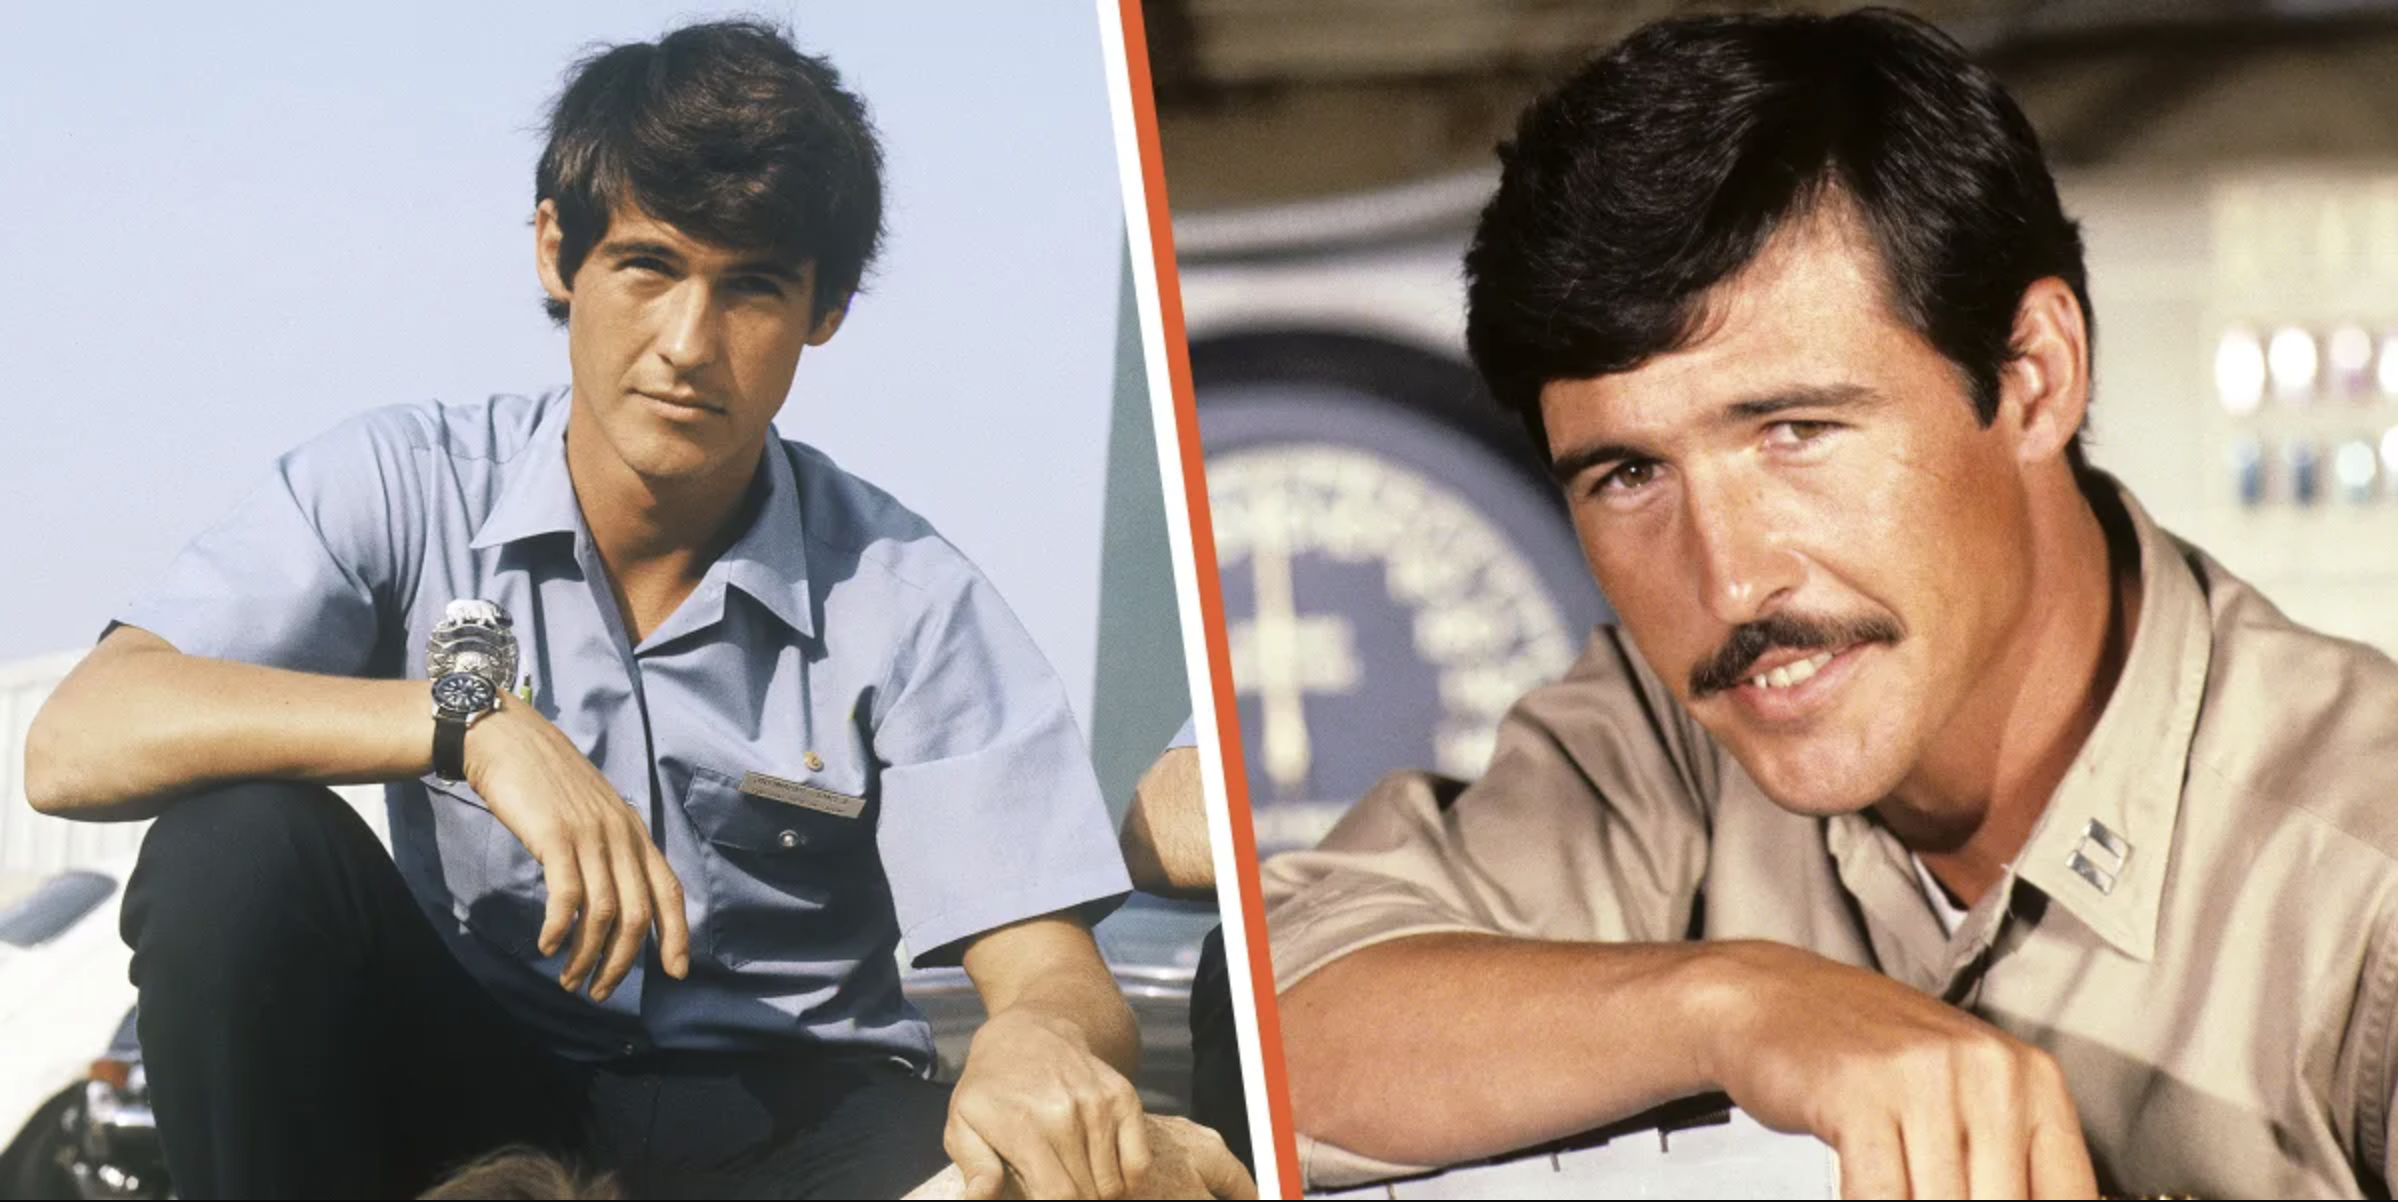 Randolph Mantooth | Source: Getty Images